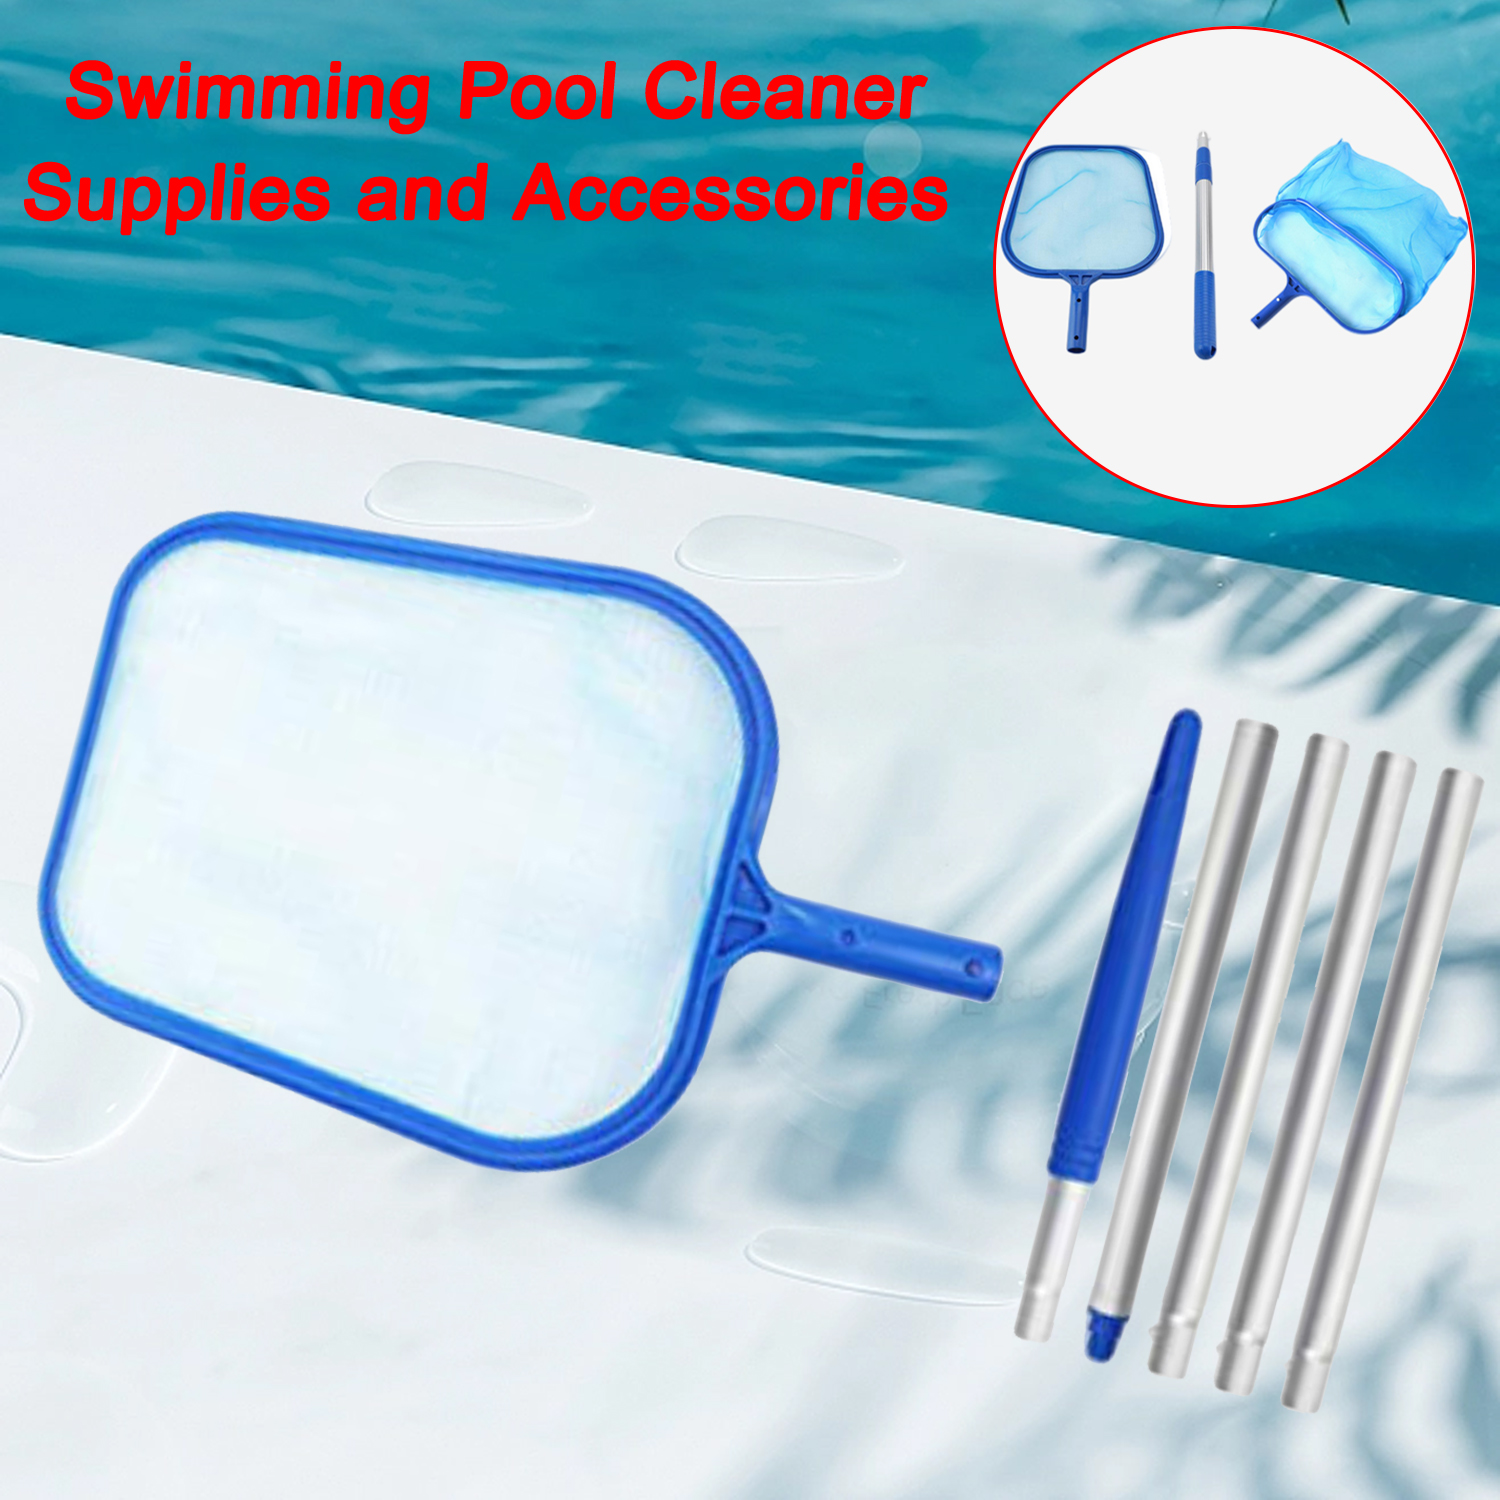 Leaf Rake Net With Adjustable Telescopic Pole for Cleaning Surface of Pond Spa Swimming Pool Cleaner Supplies and Accessories